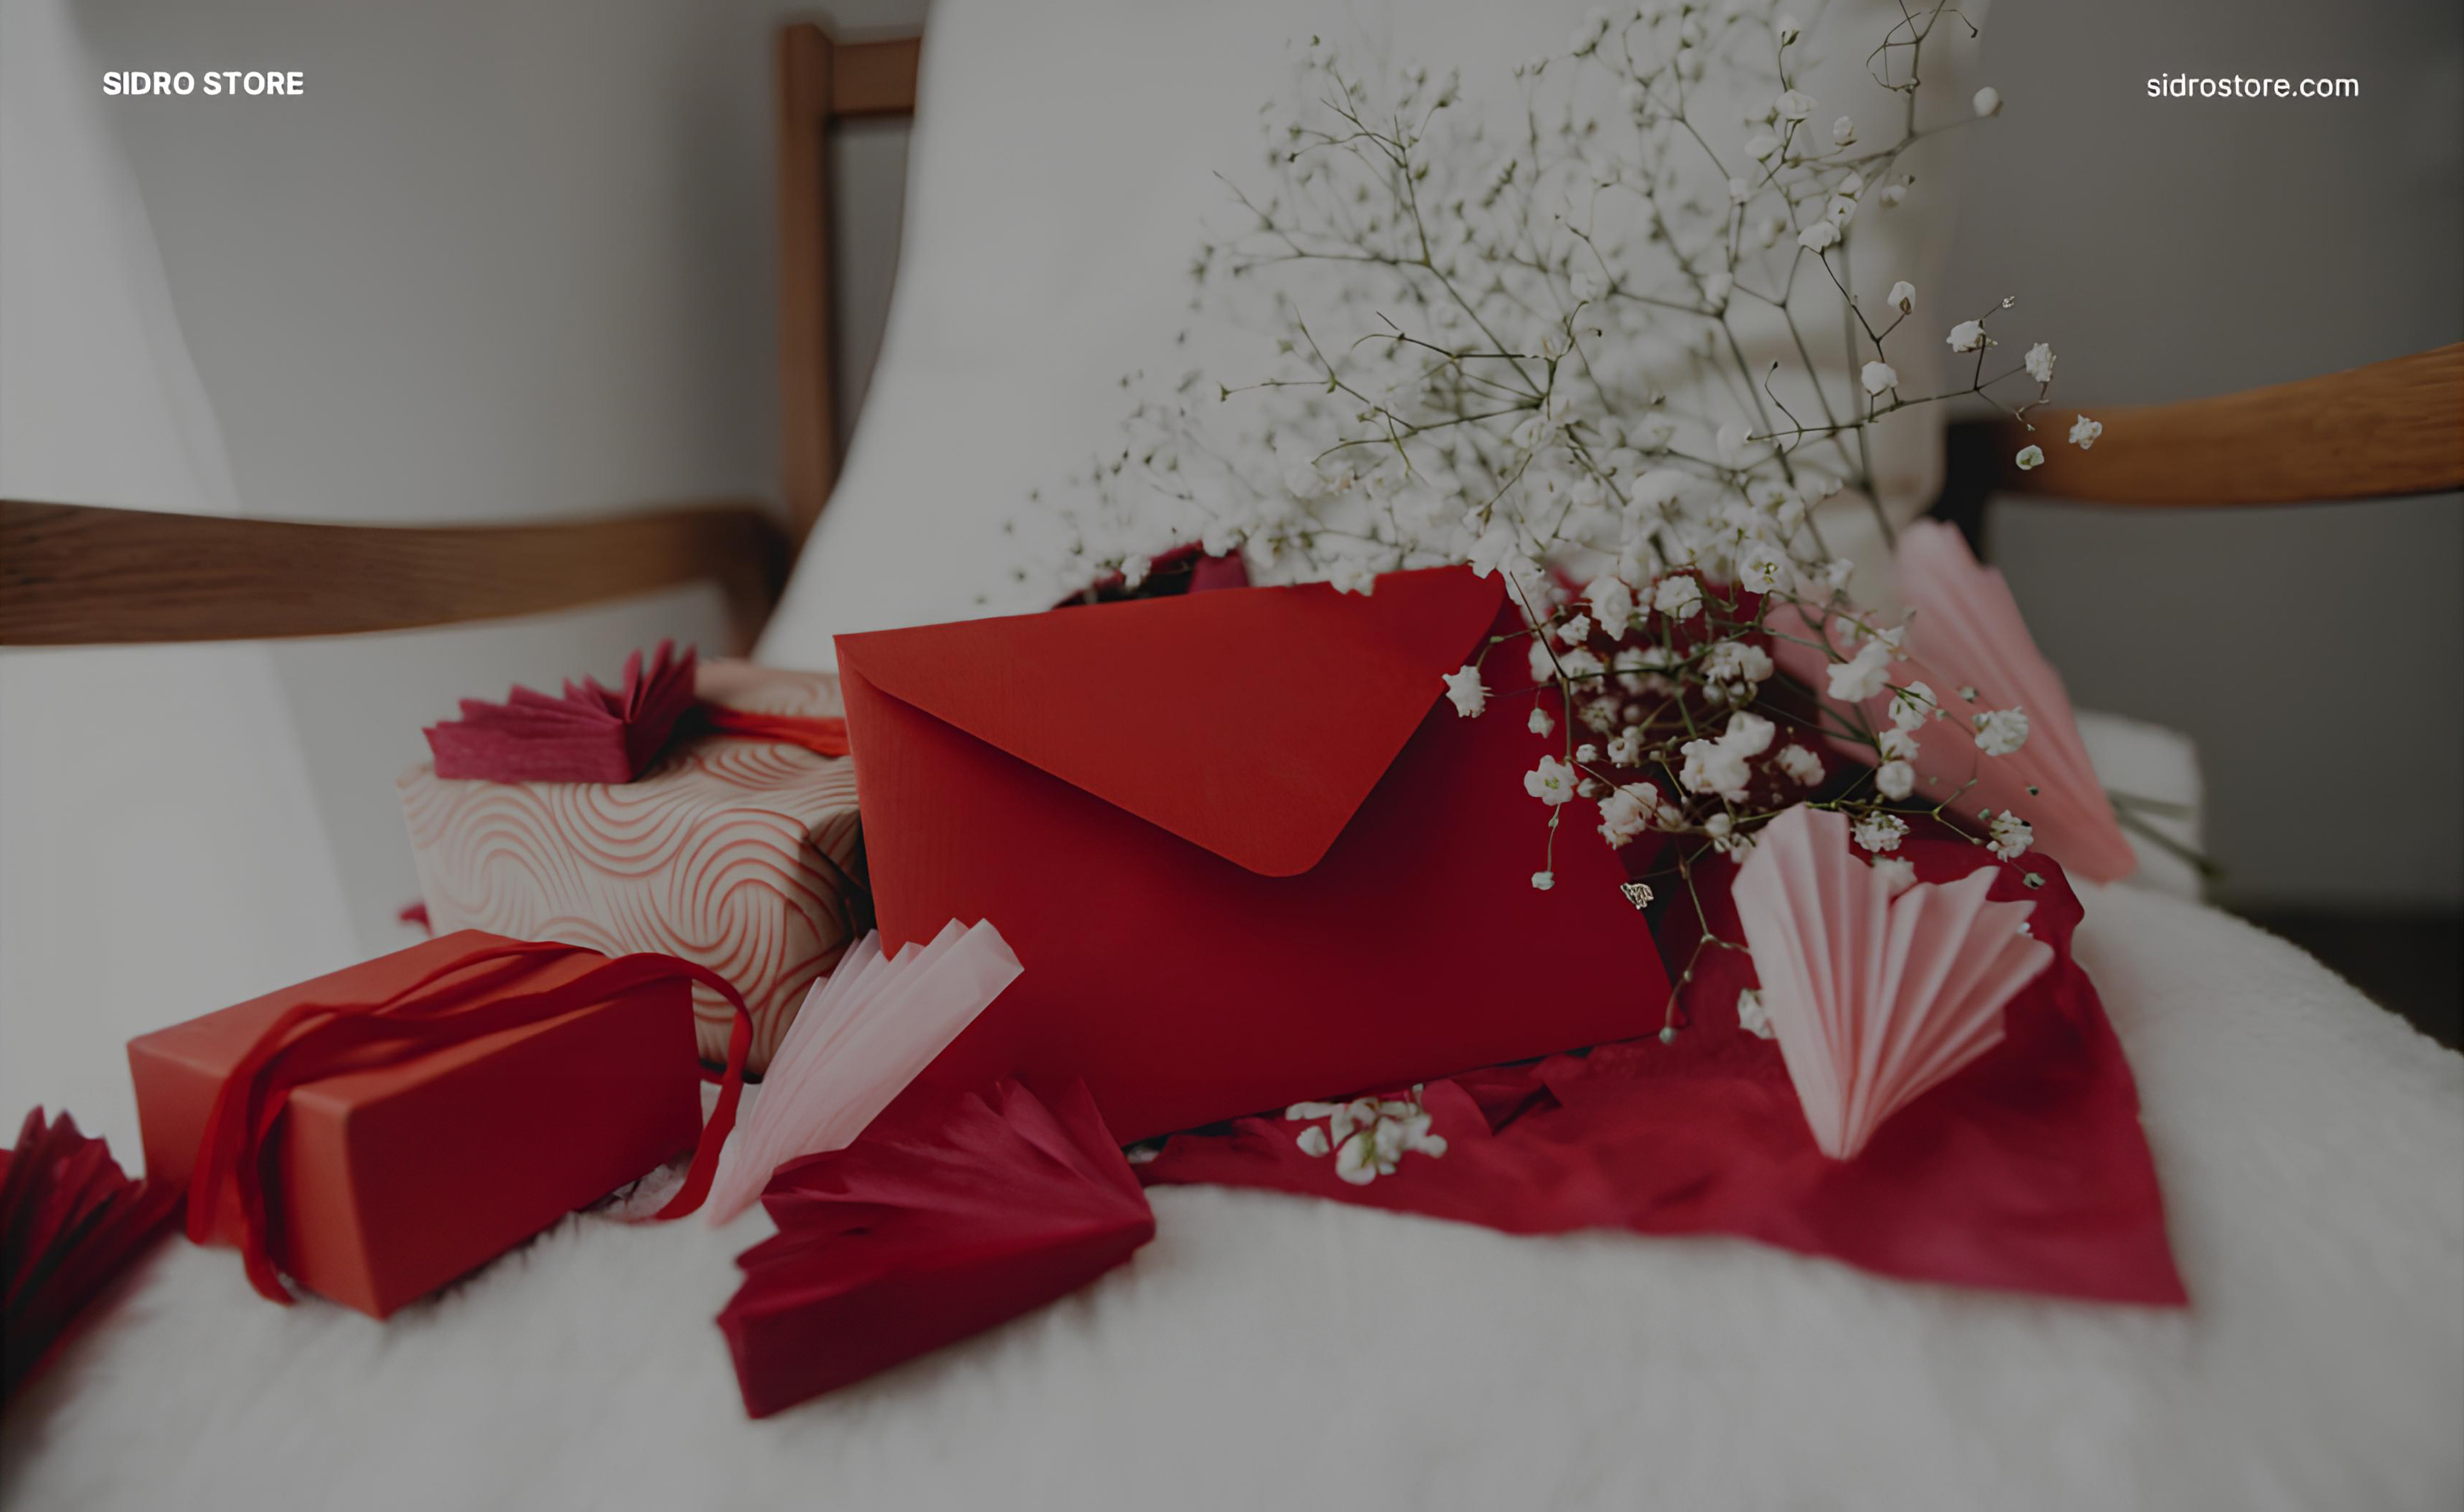 5 interesting and quality Valentine's Day gift ideas for her and him